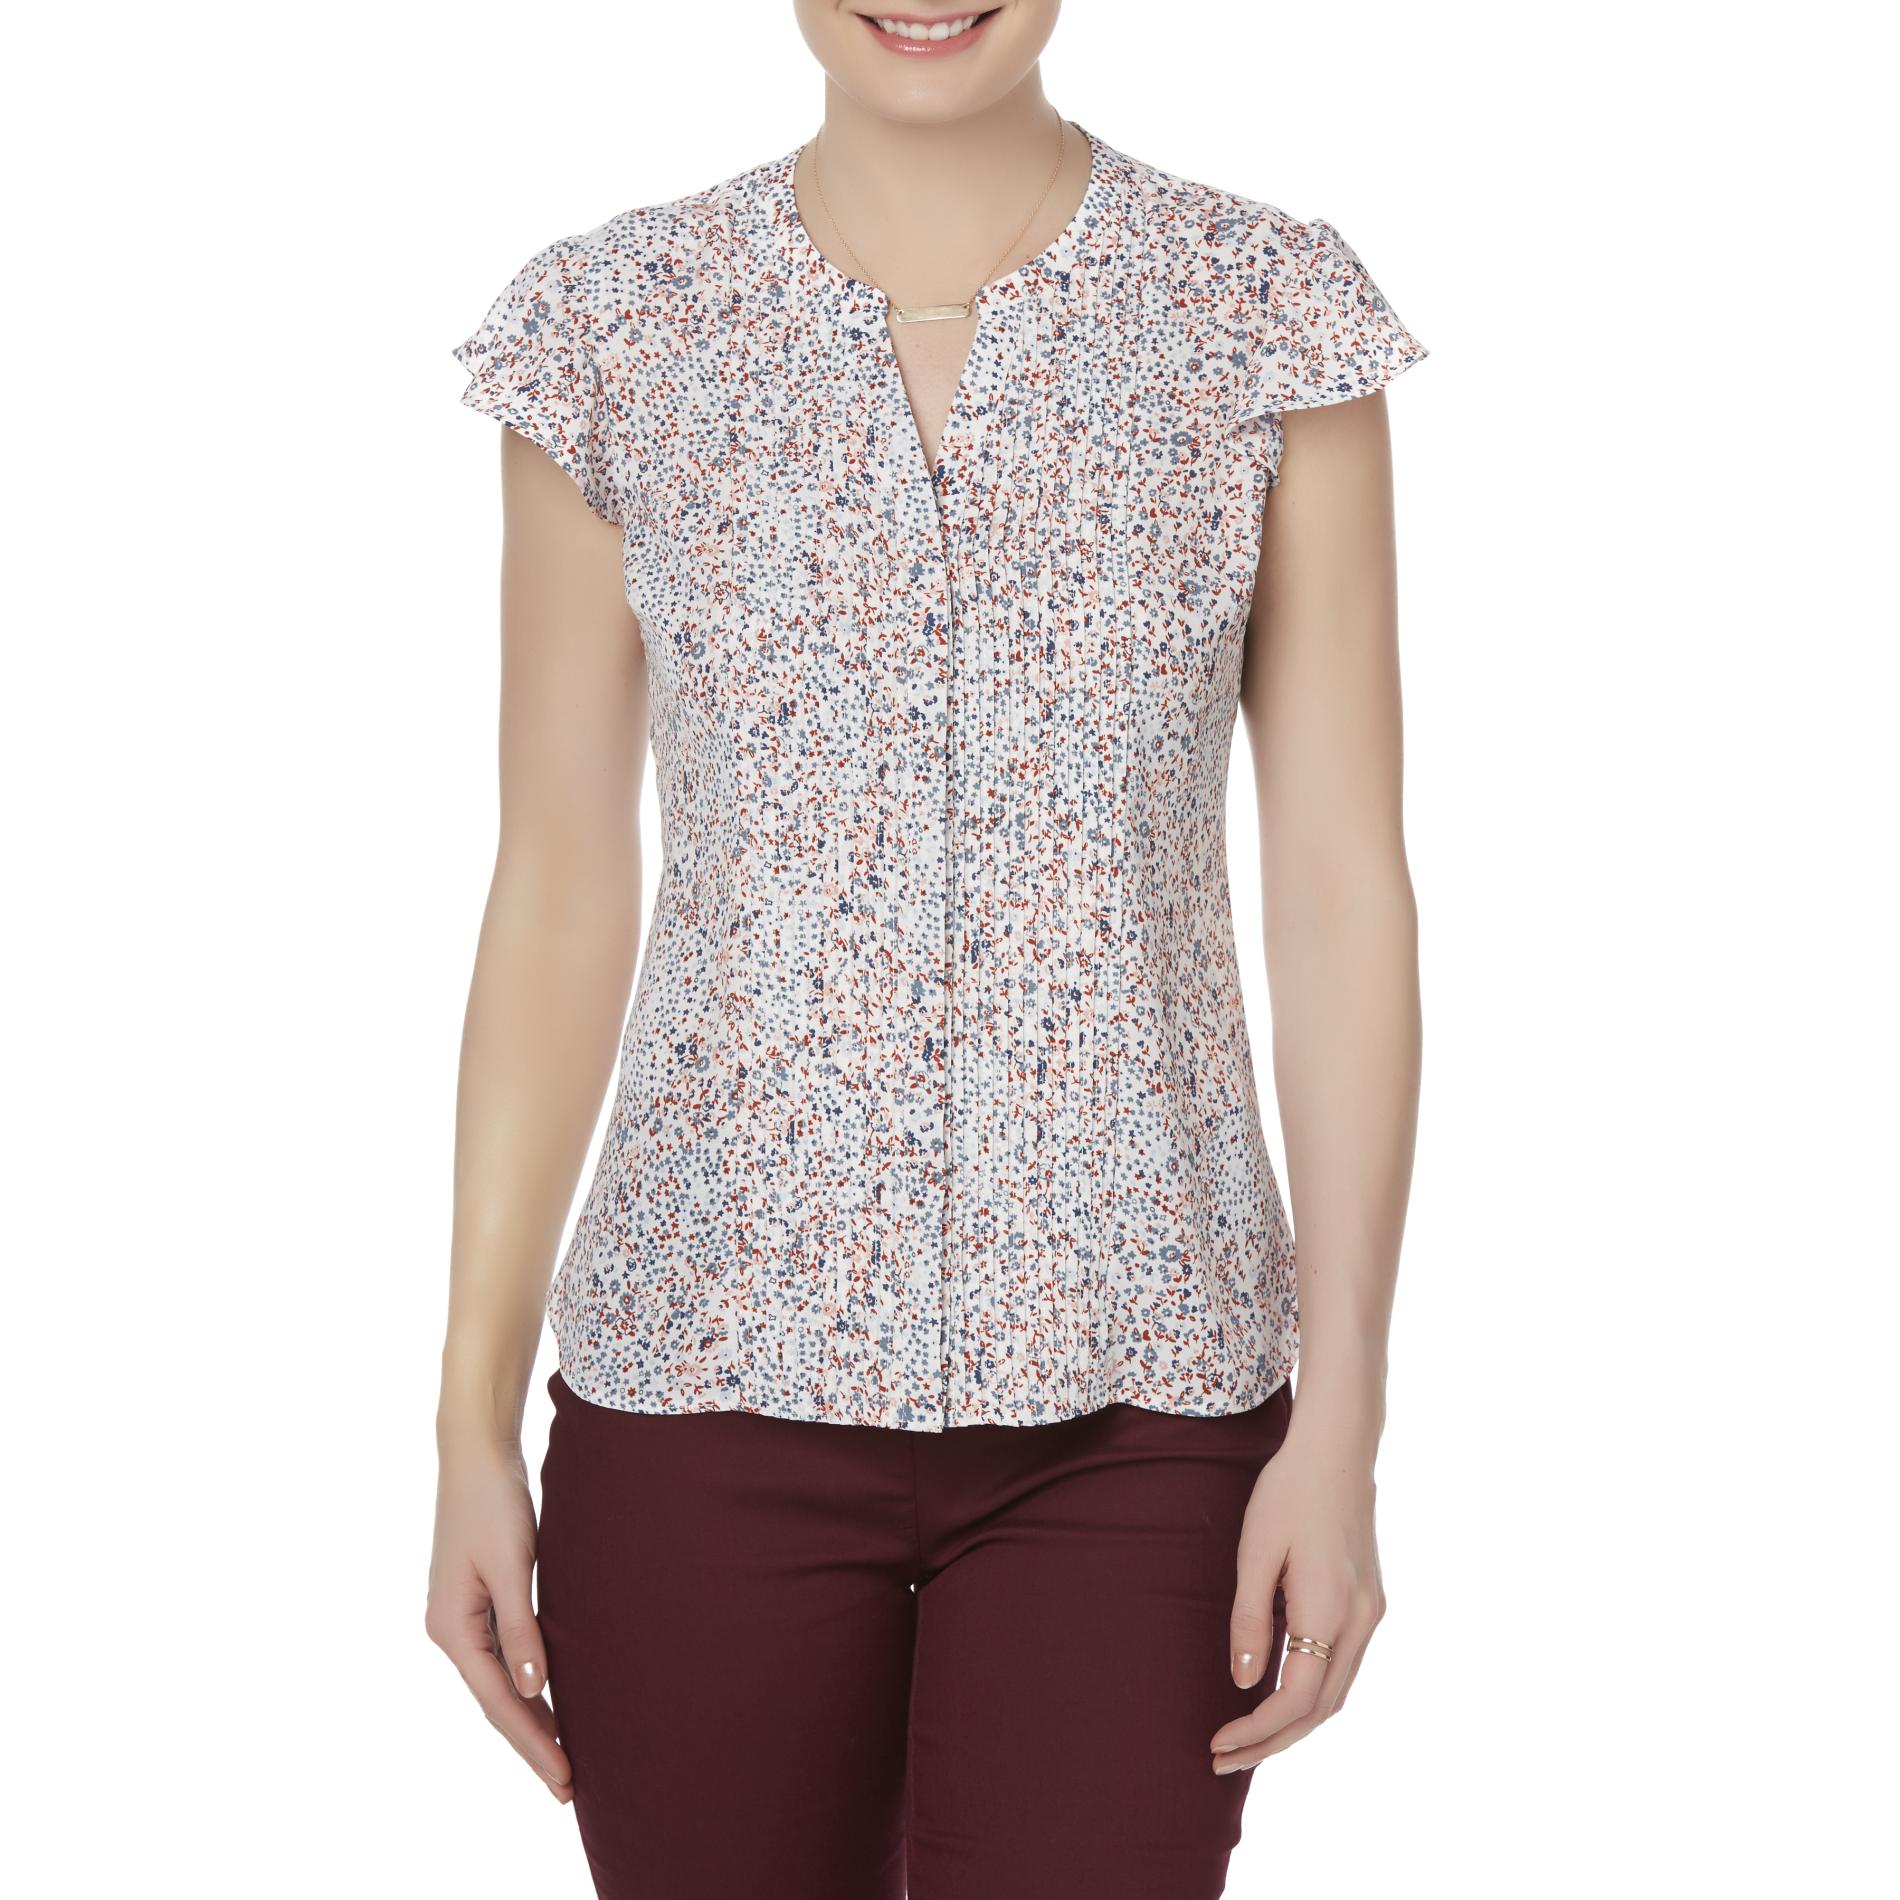 Simply Styled Women's Fashion Blouse - Floral